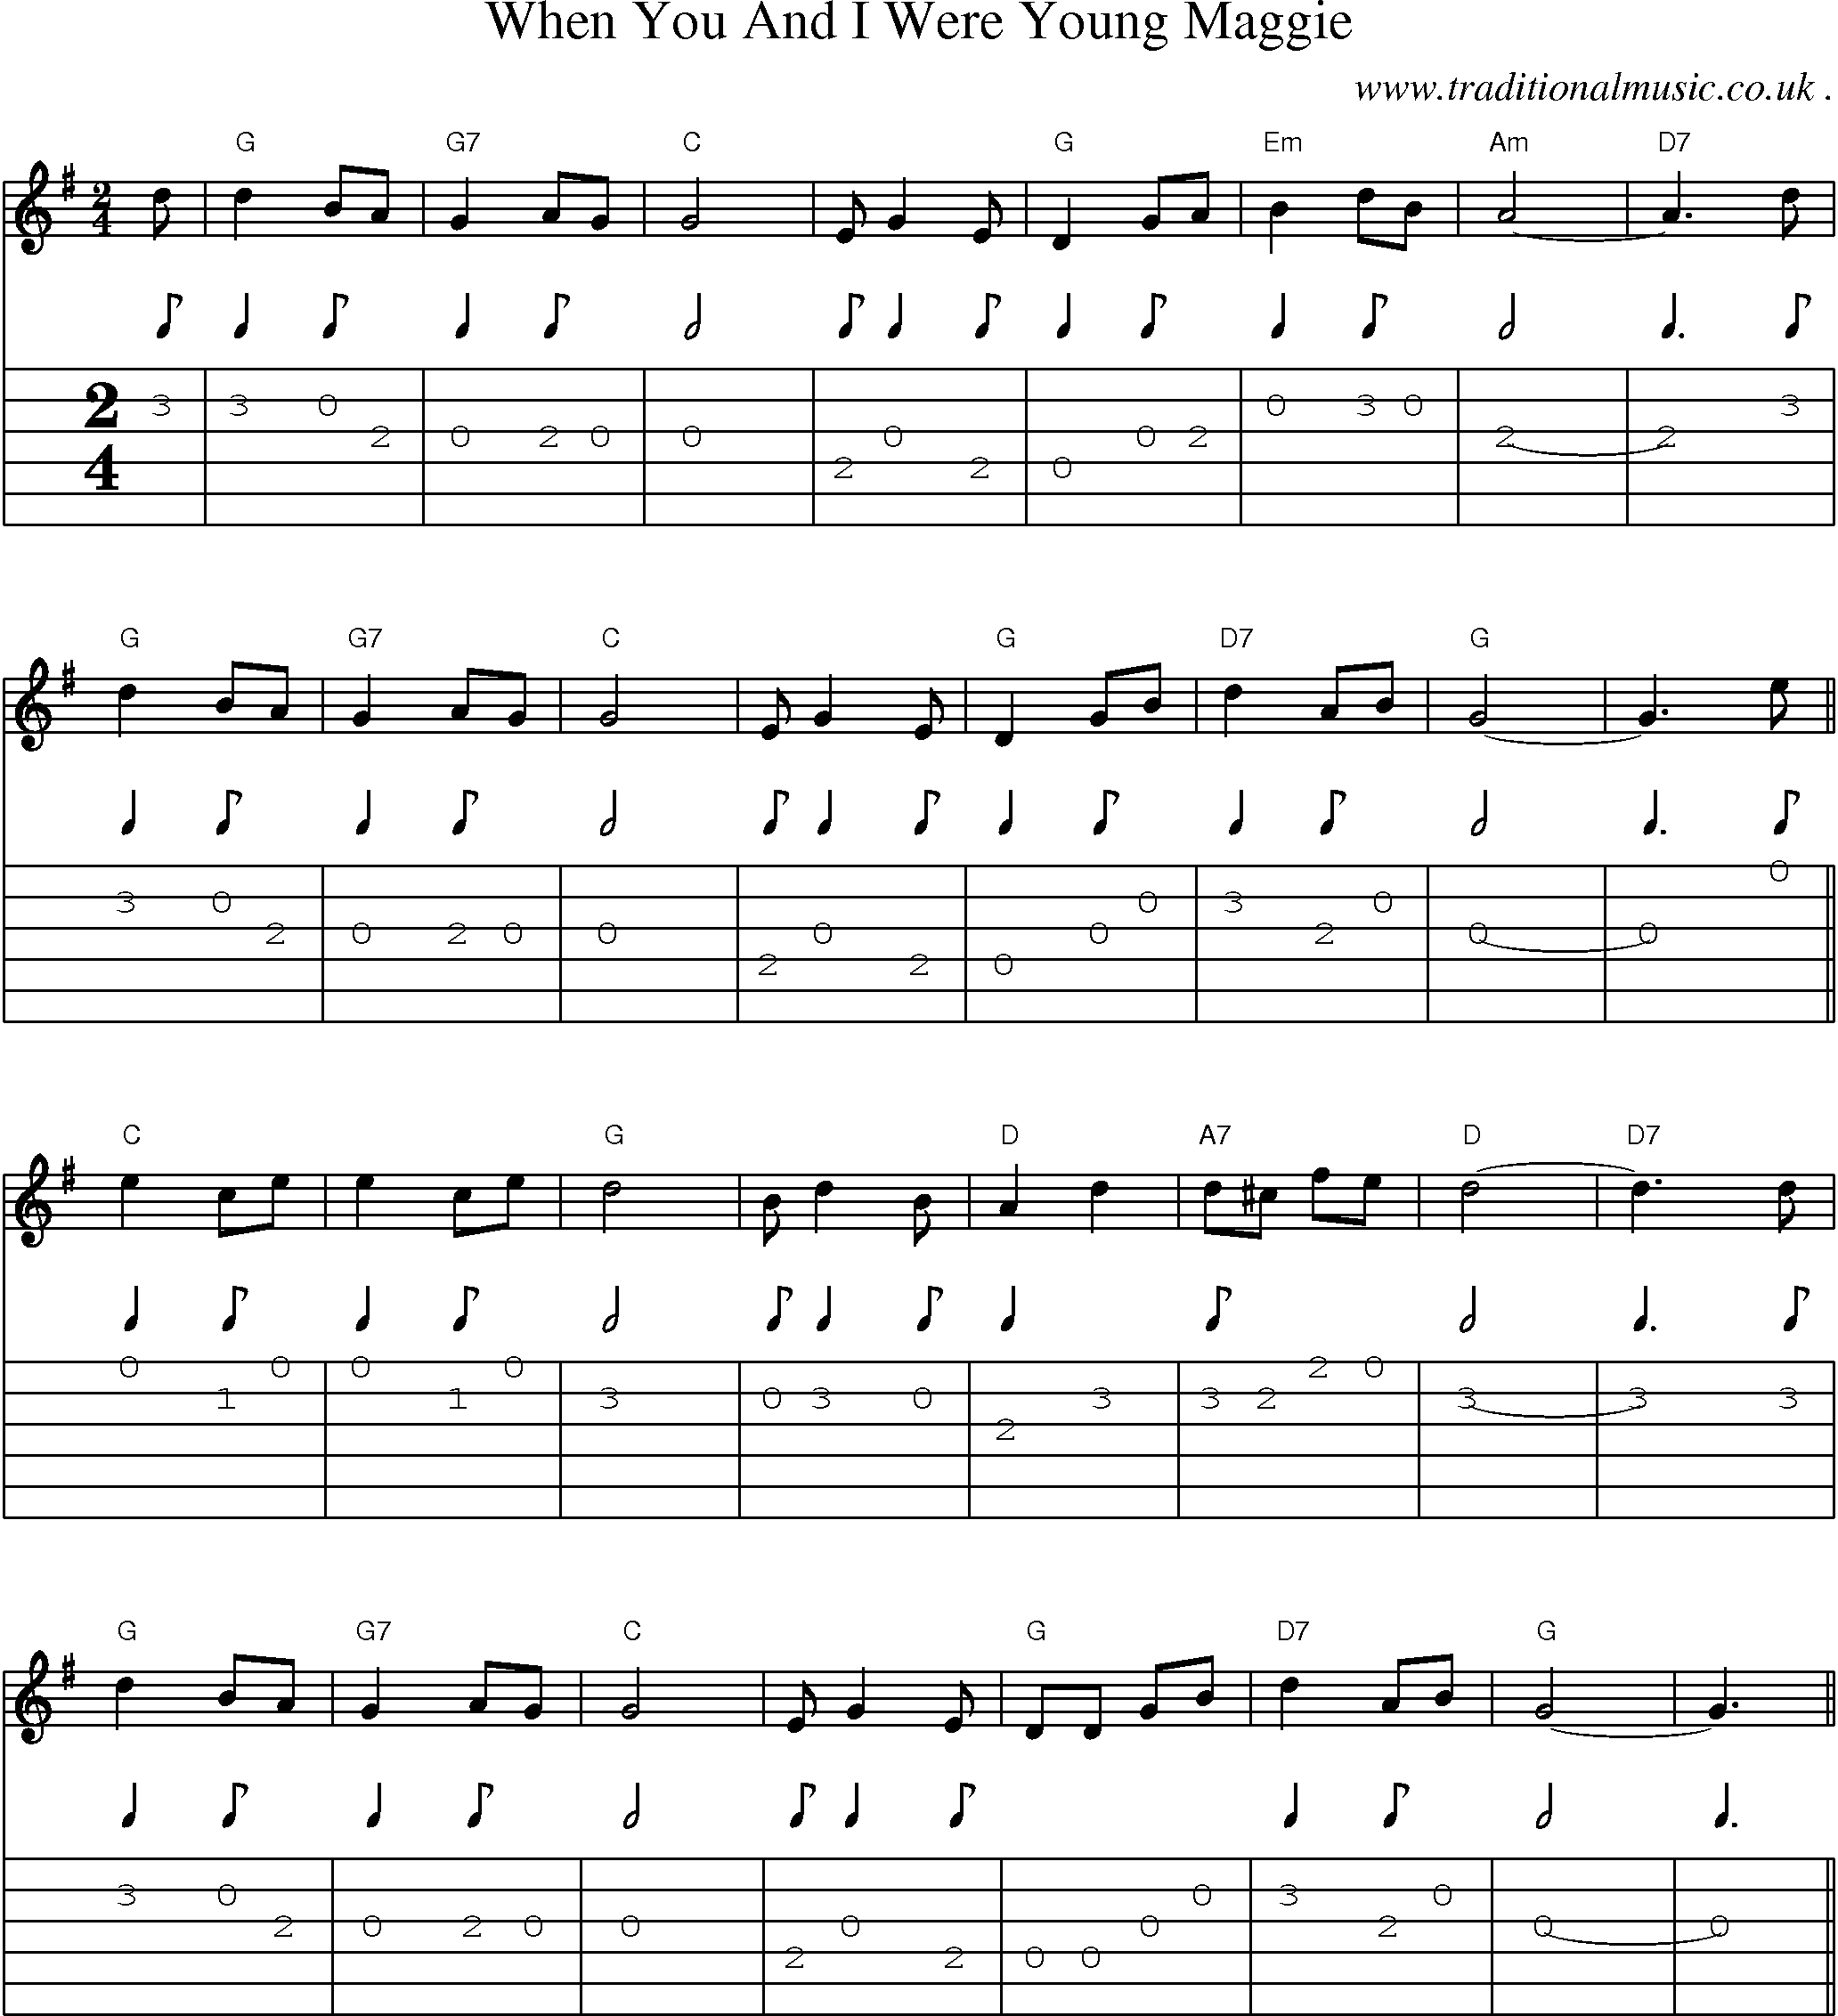 Sheet-Music and Guitar Tabs for When You And I Were Young Maggie